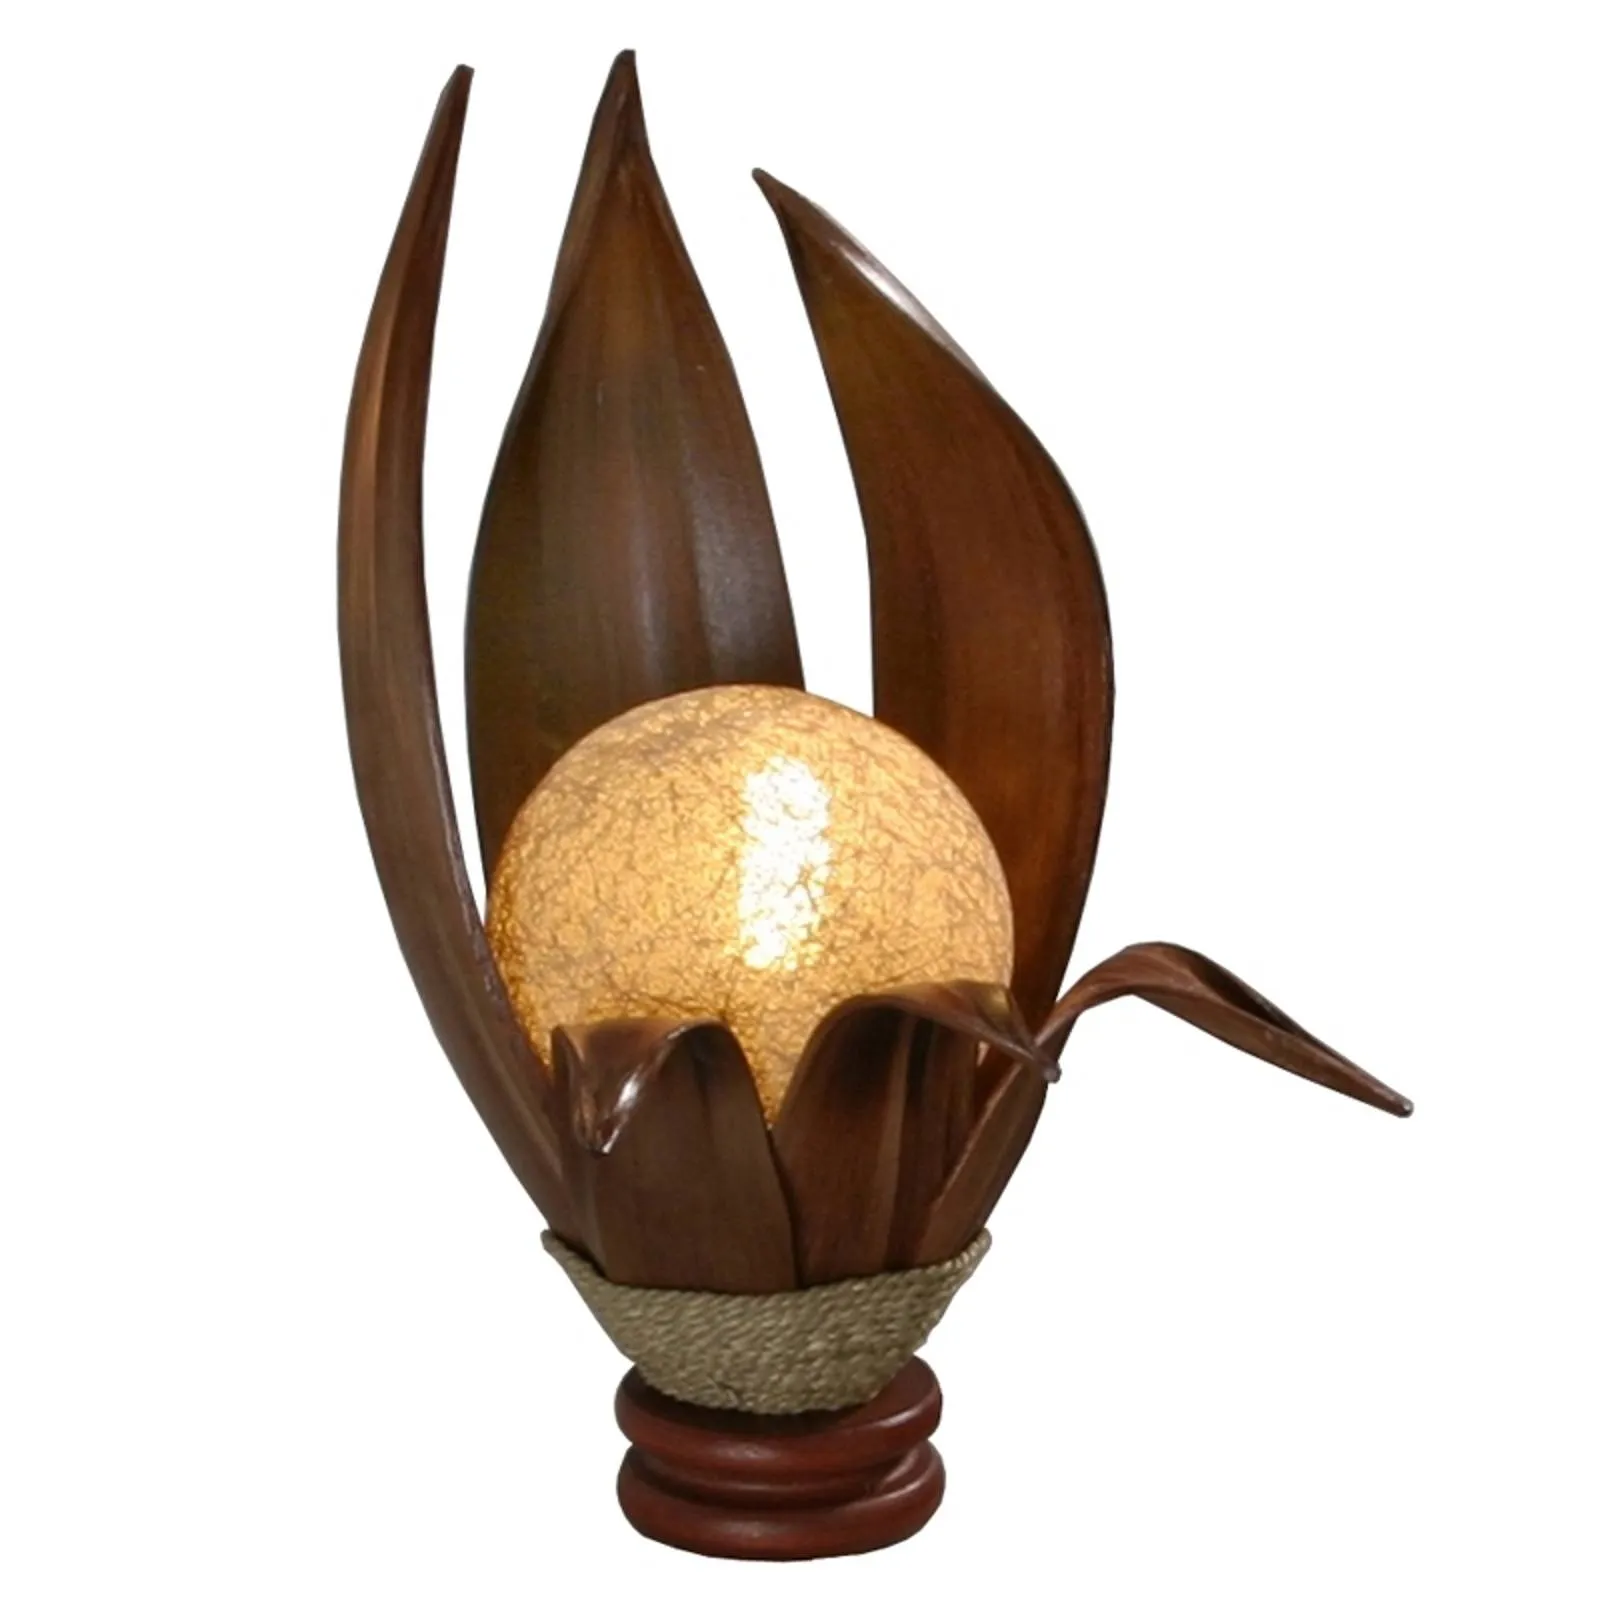 Karima table lamp made of hardened coconut leaves